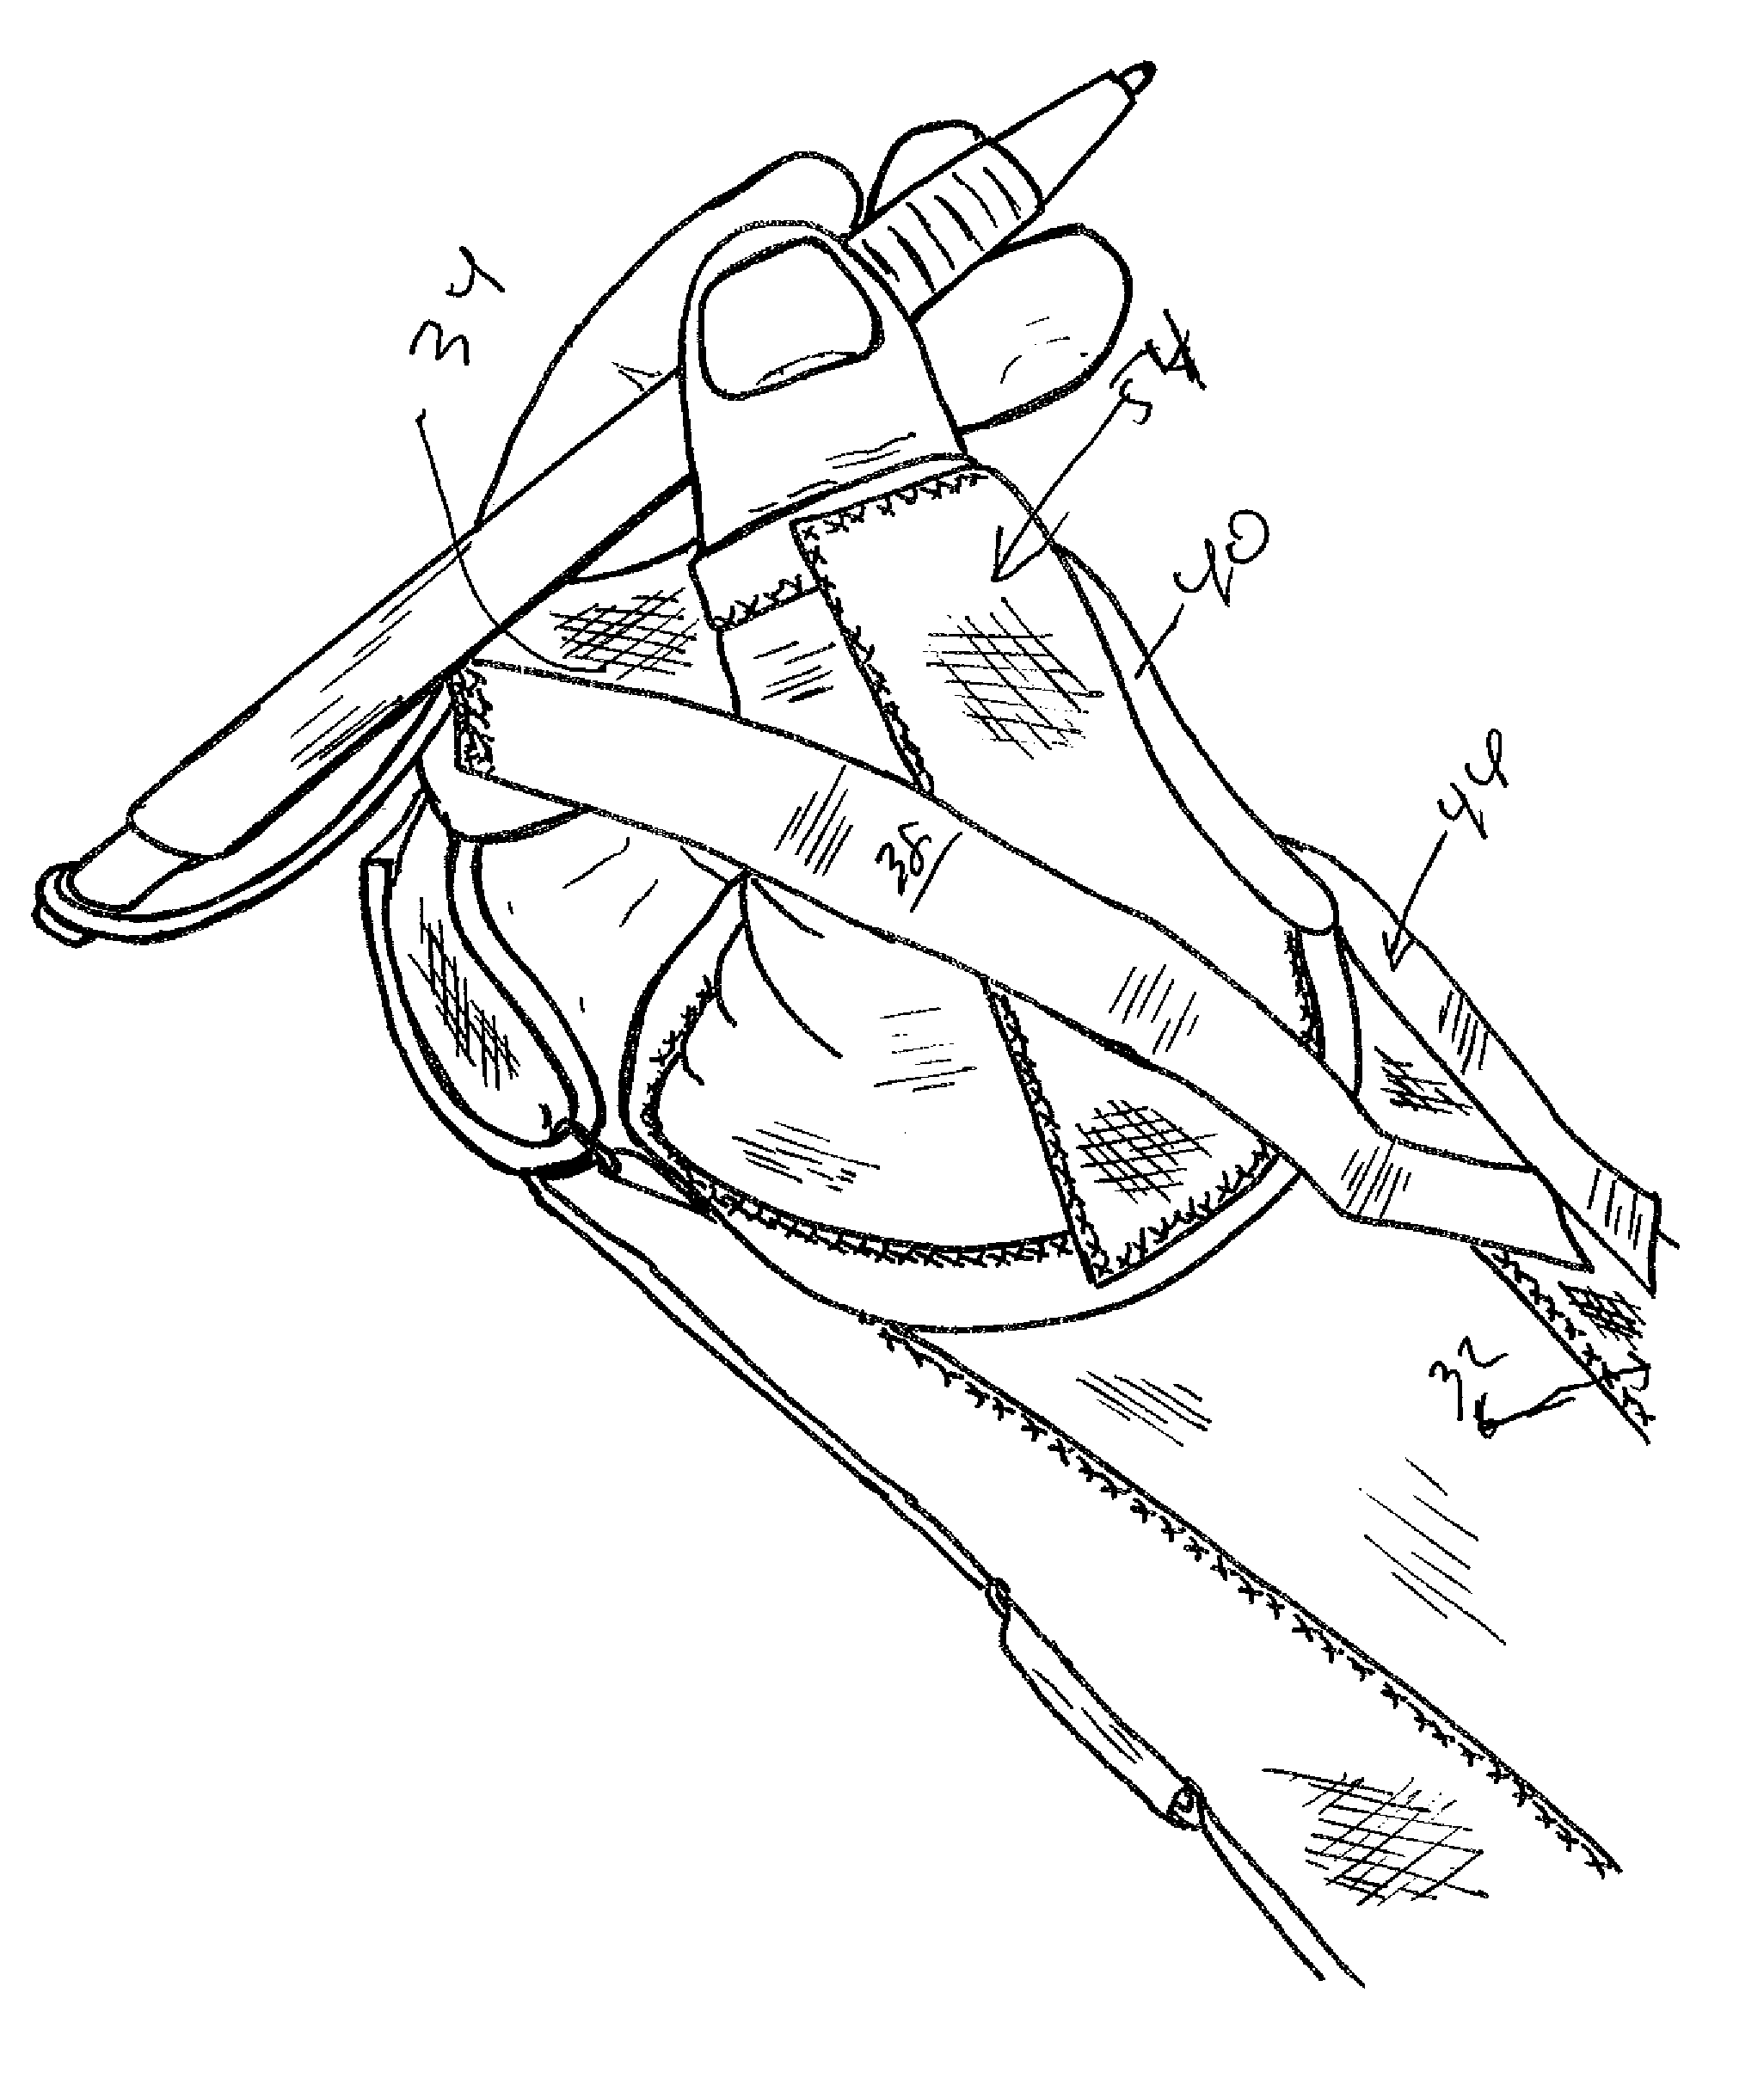 Digit-supporting therapeutic device for the hand